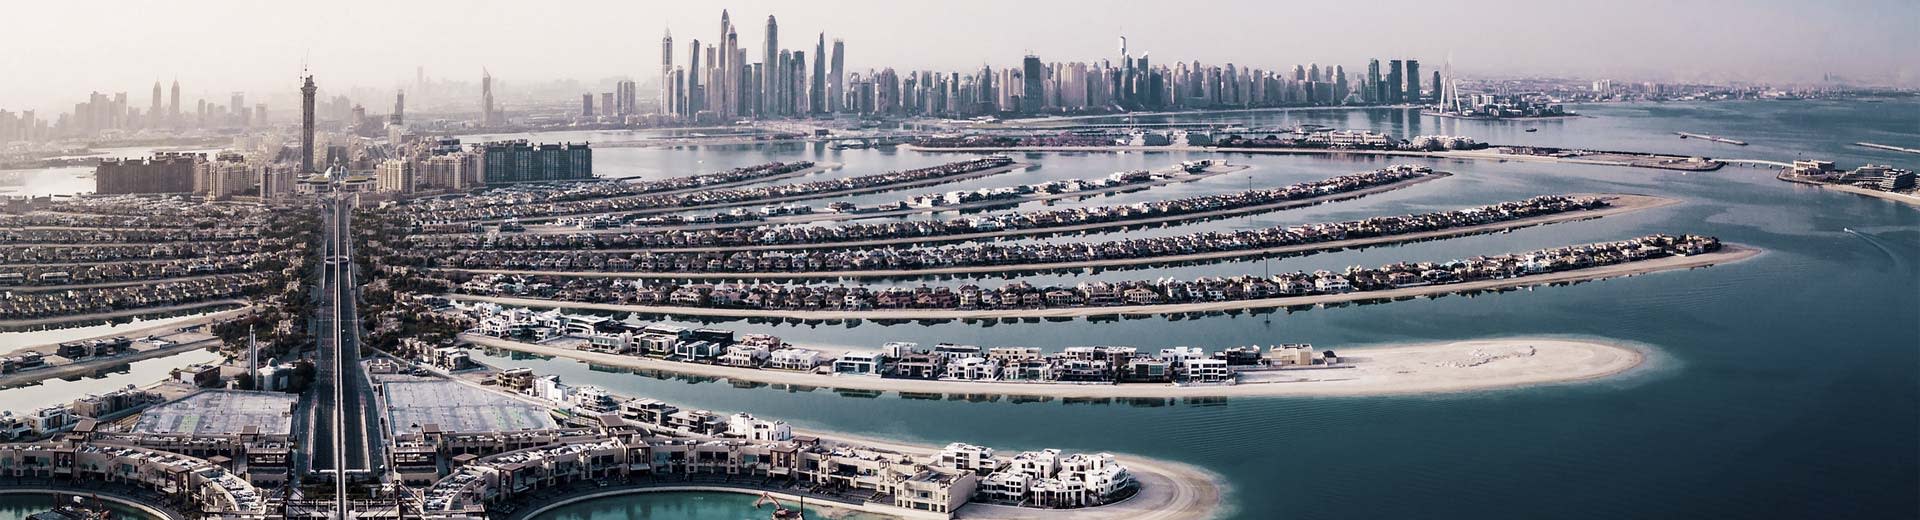 Dubai’s Palm Jumeirah, man-made islands in the shape of palm fronds, with the skyline of the downtown core in the background.